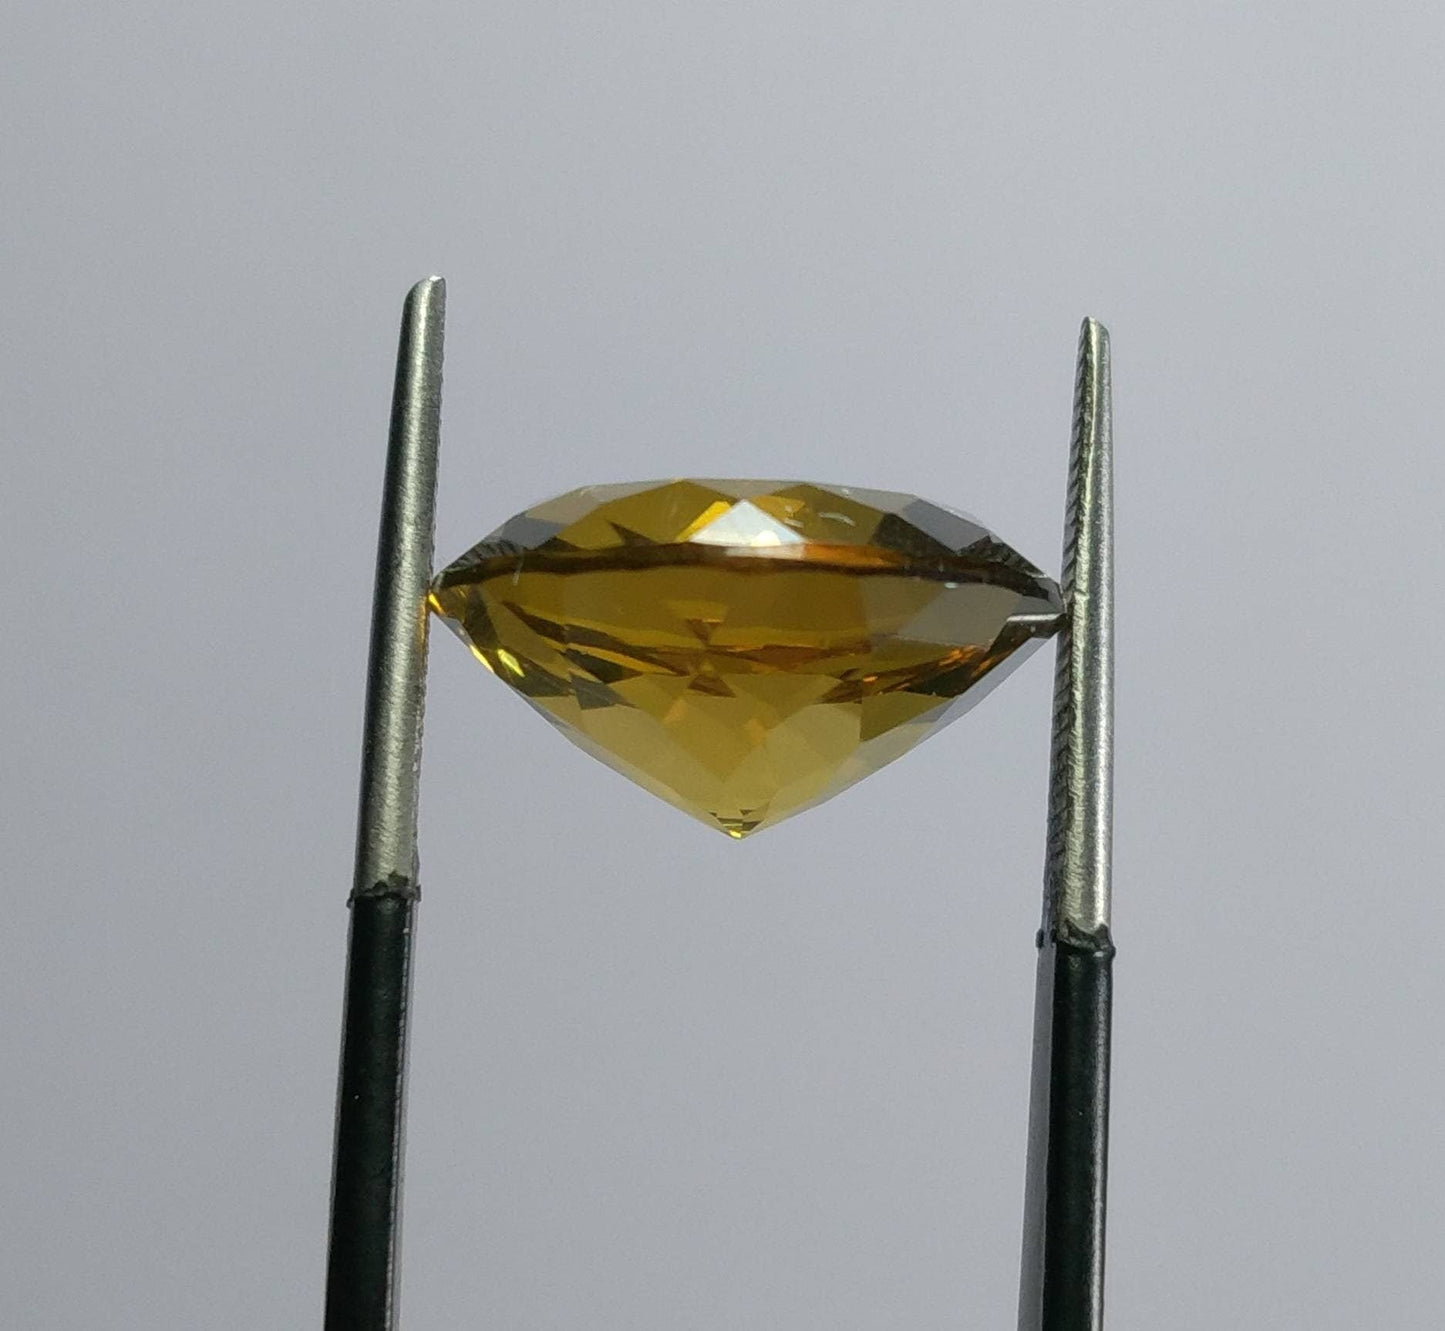 ARSAA GEMS AND MINERALSNatural top quality beautiful 10 carats VV clarity round shape Faceted citrine gem - Premium  from ARSAA GEMS AND MINERALS - Just $30.00! Shop now at ARSAA GEMS AND MINERALS